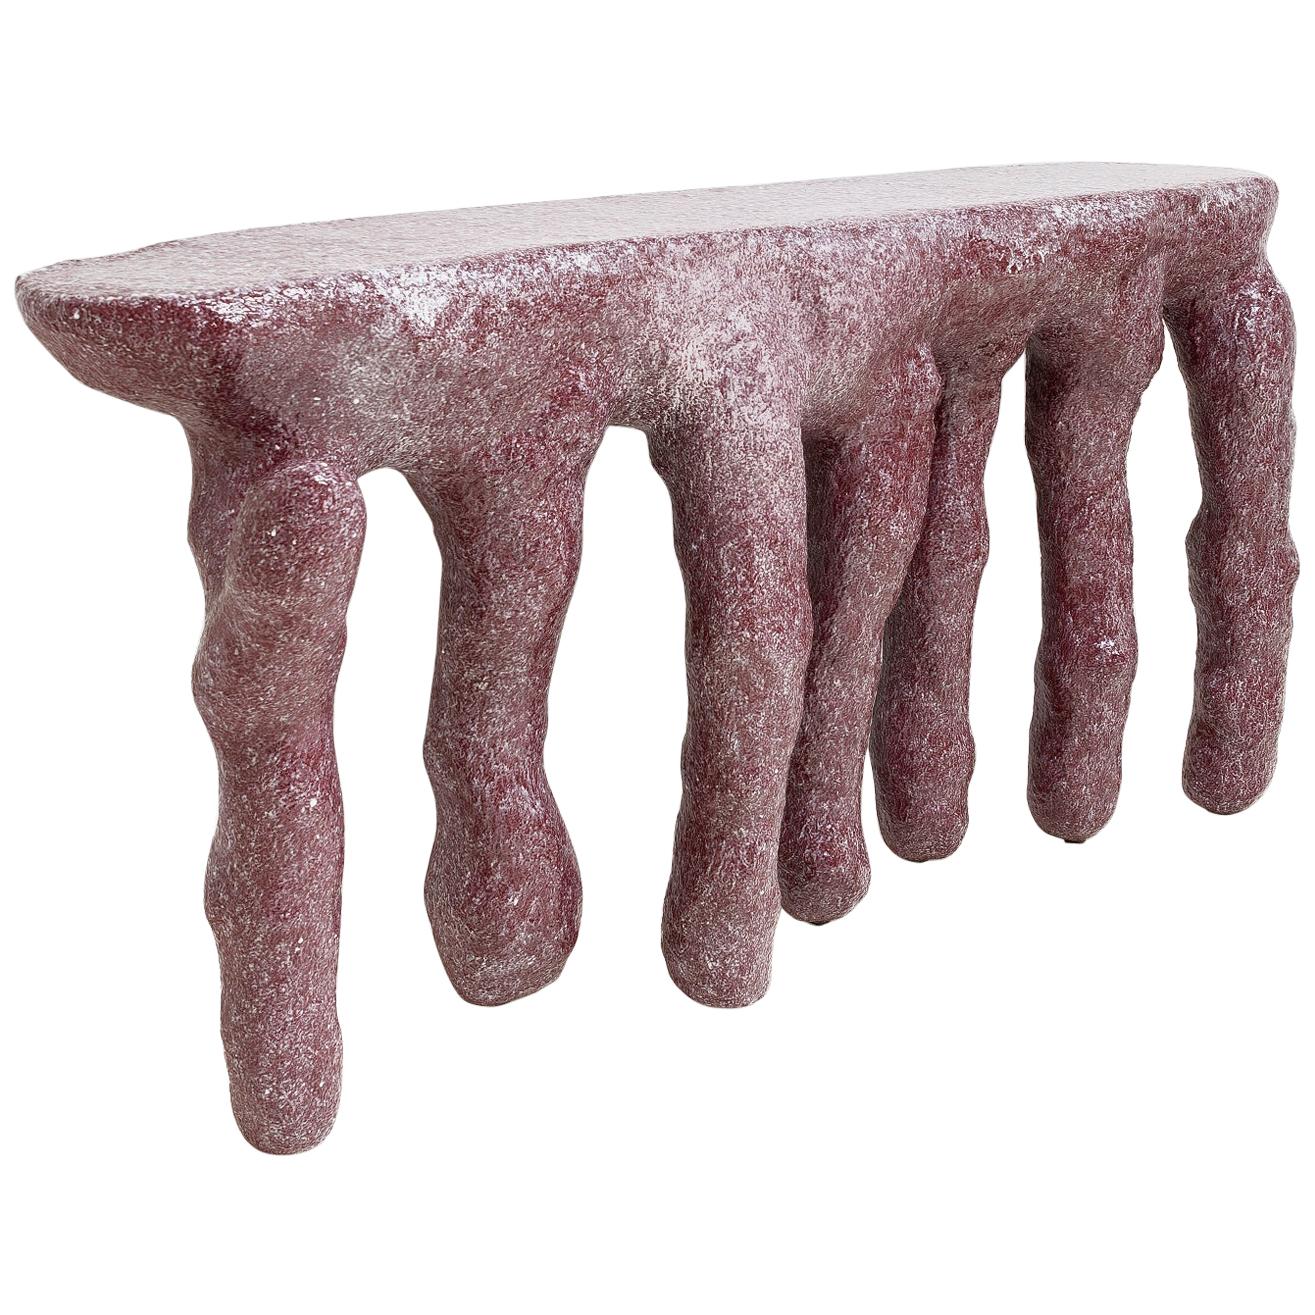 Lukas Saint-Joigny, Pink/Red Contemporary Console, 2020, From the 'Ore' Series